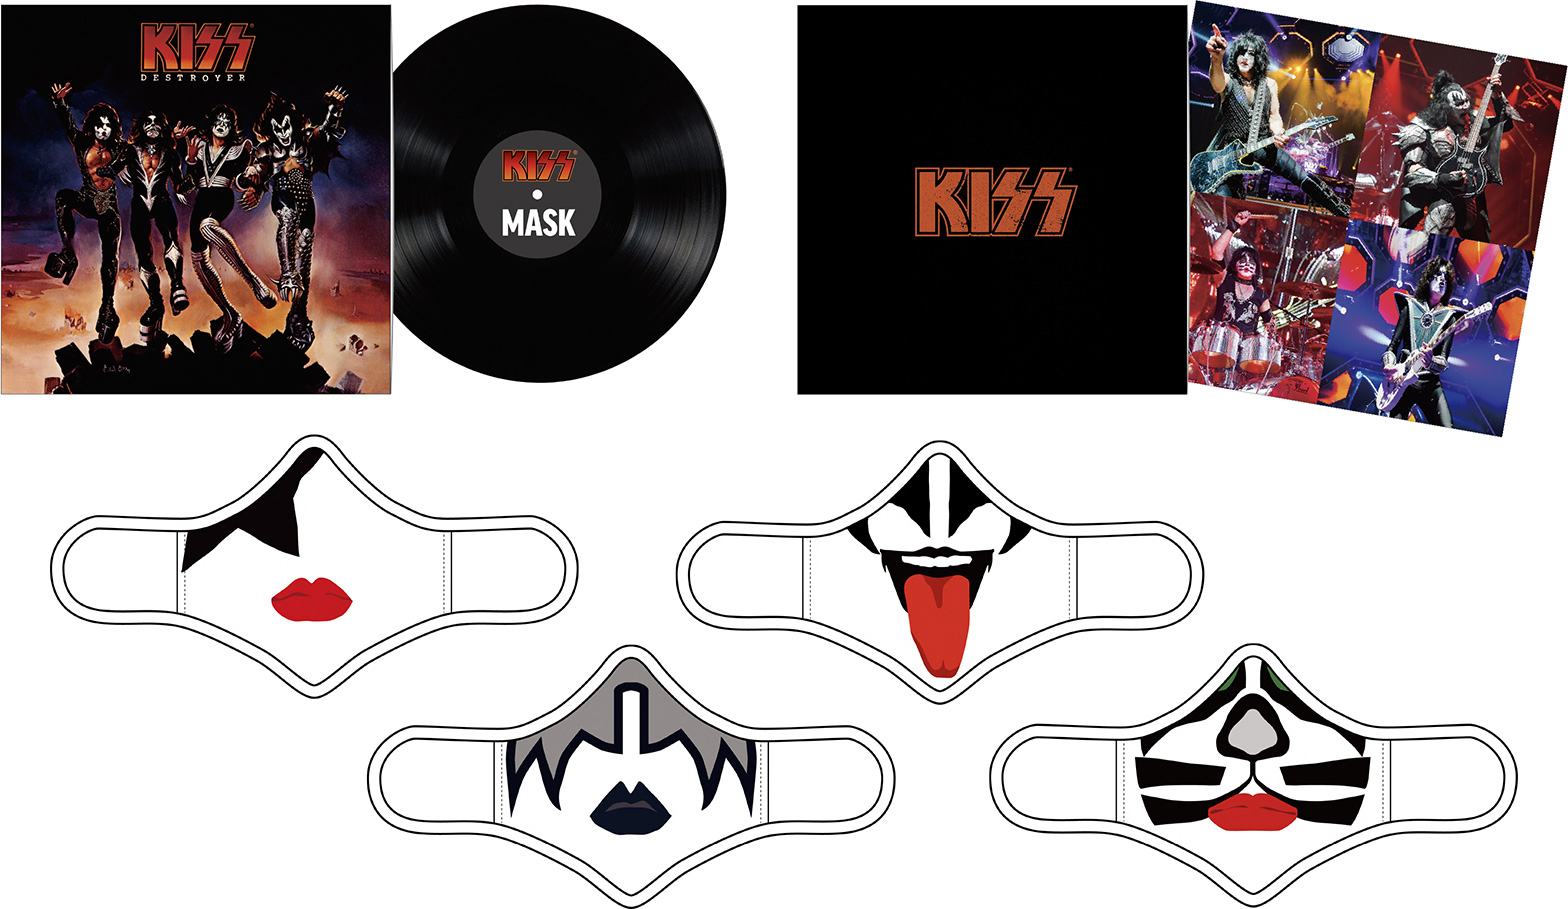 KISS MASK - LP Size package